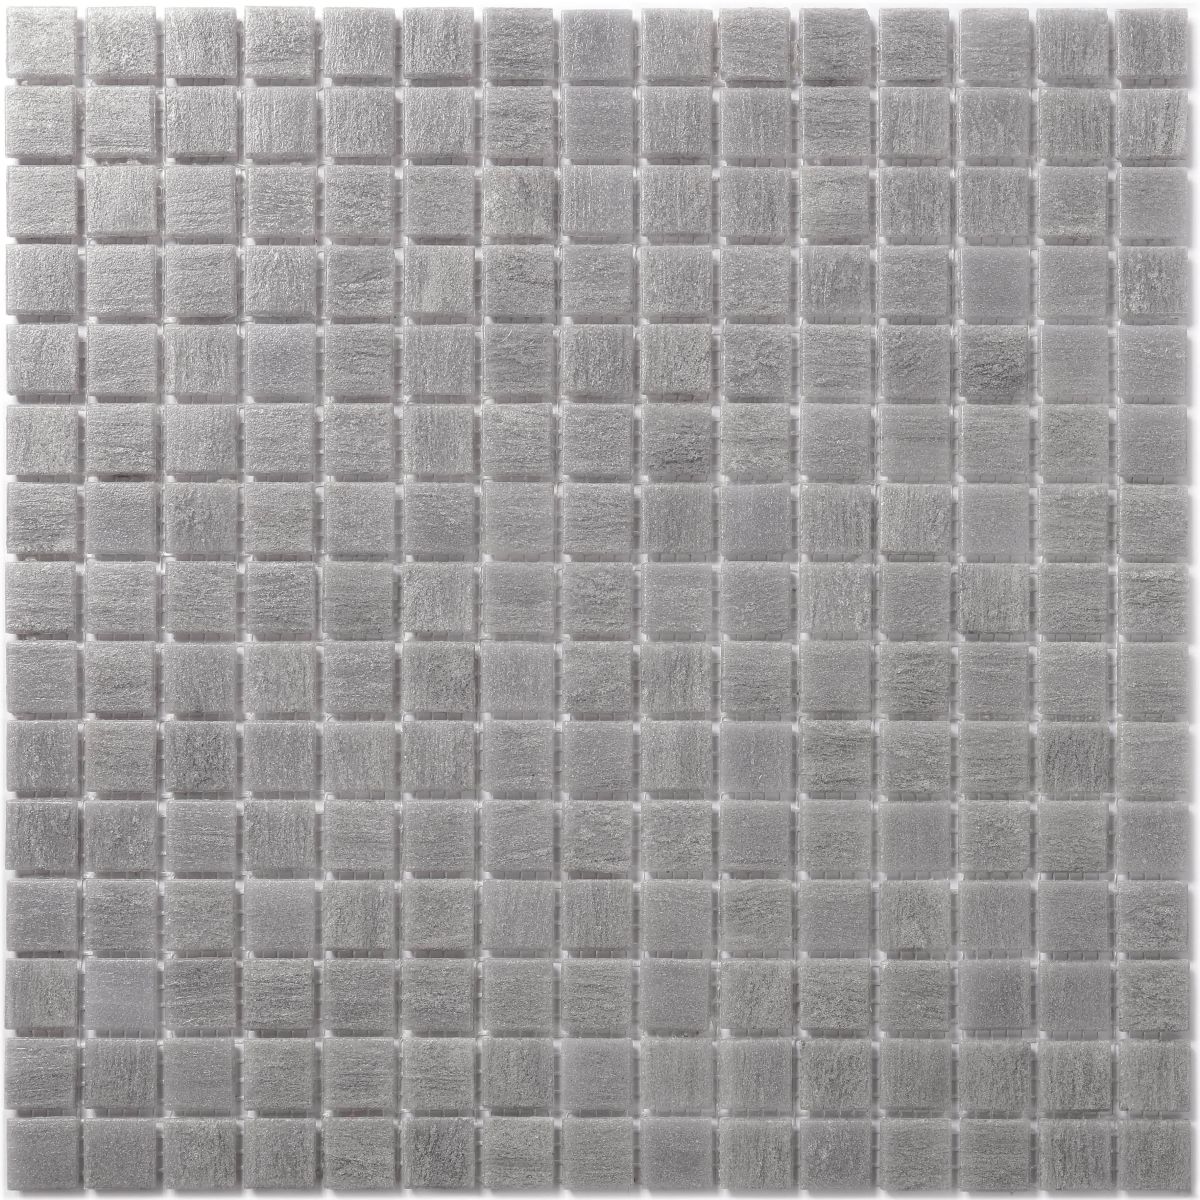 Hot-Melted Fine Moss Glass Square Grey Mosaic Tile 